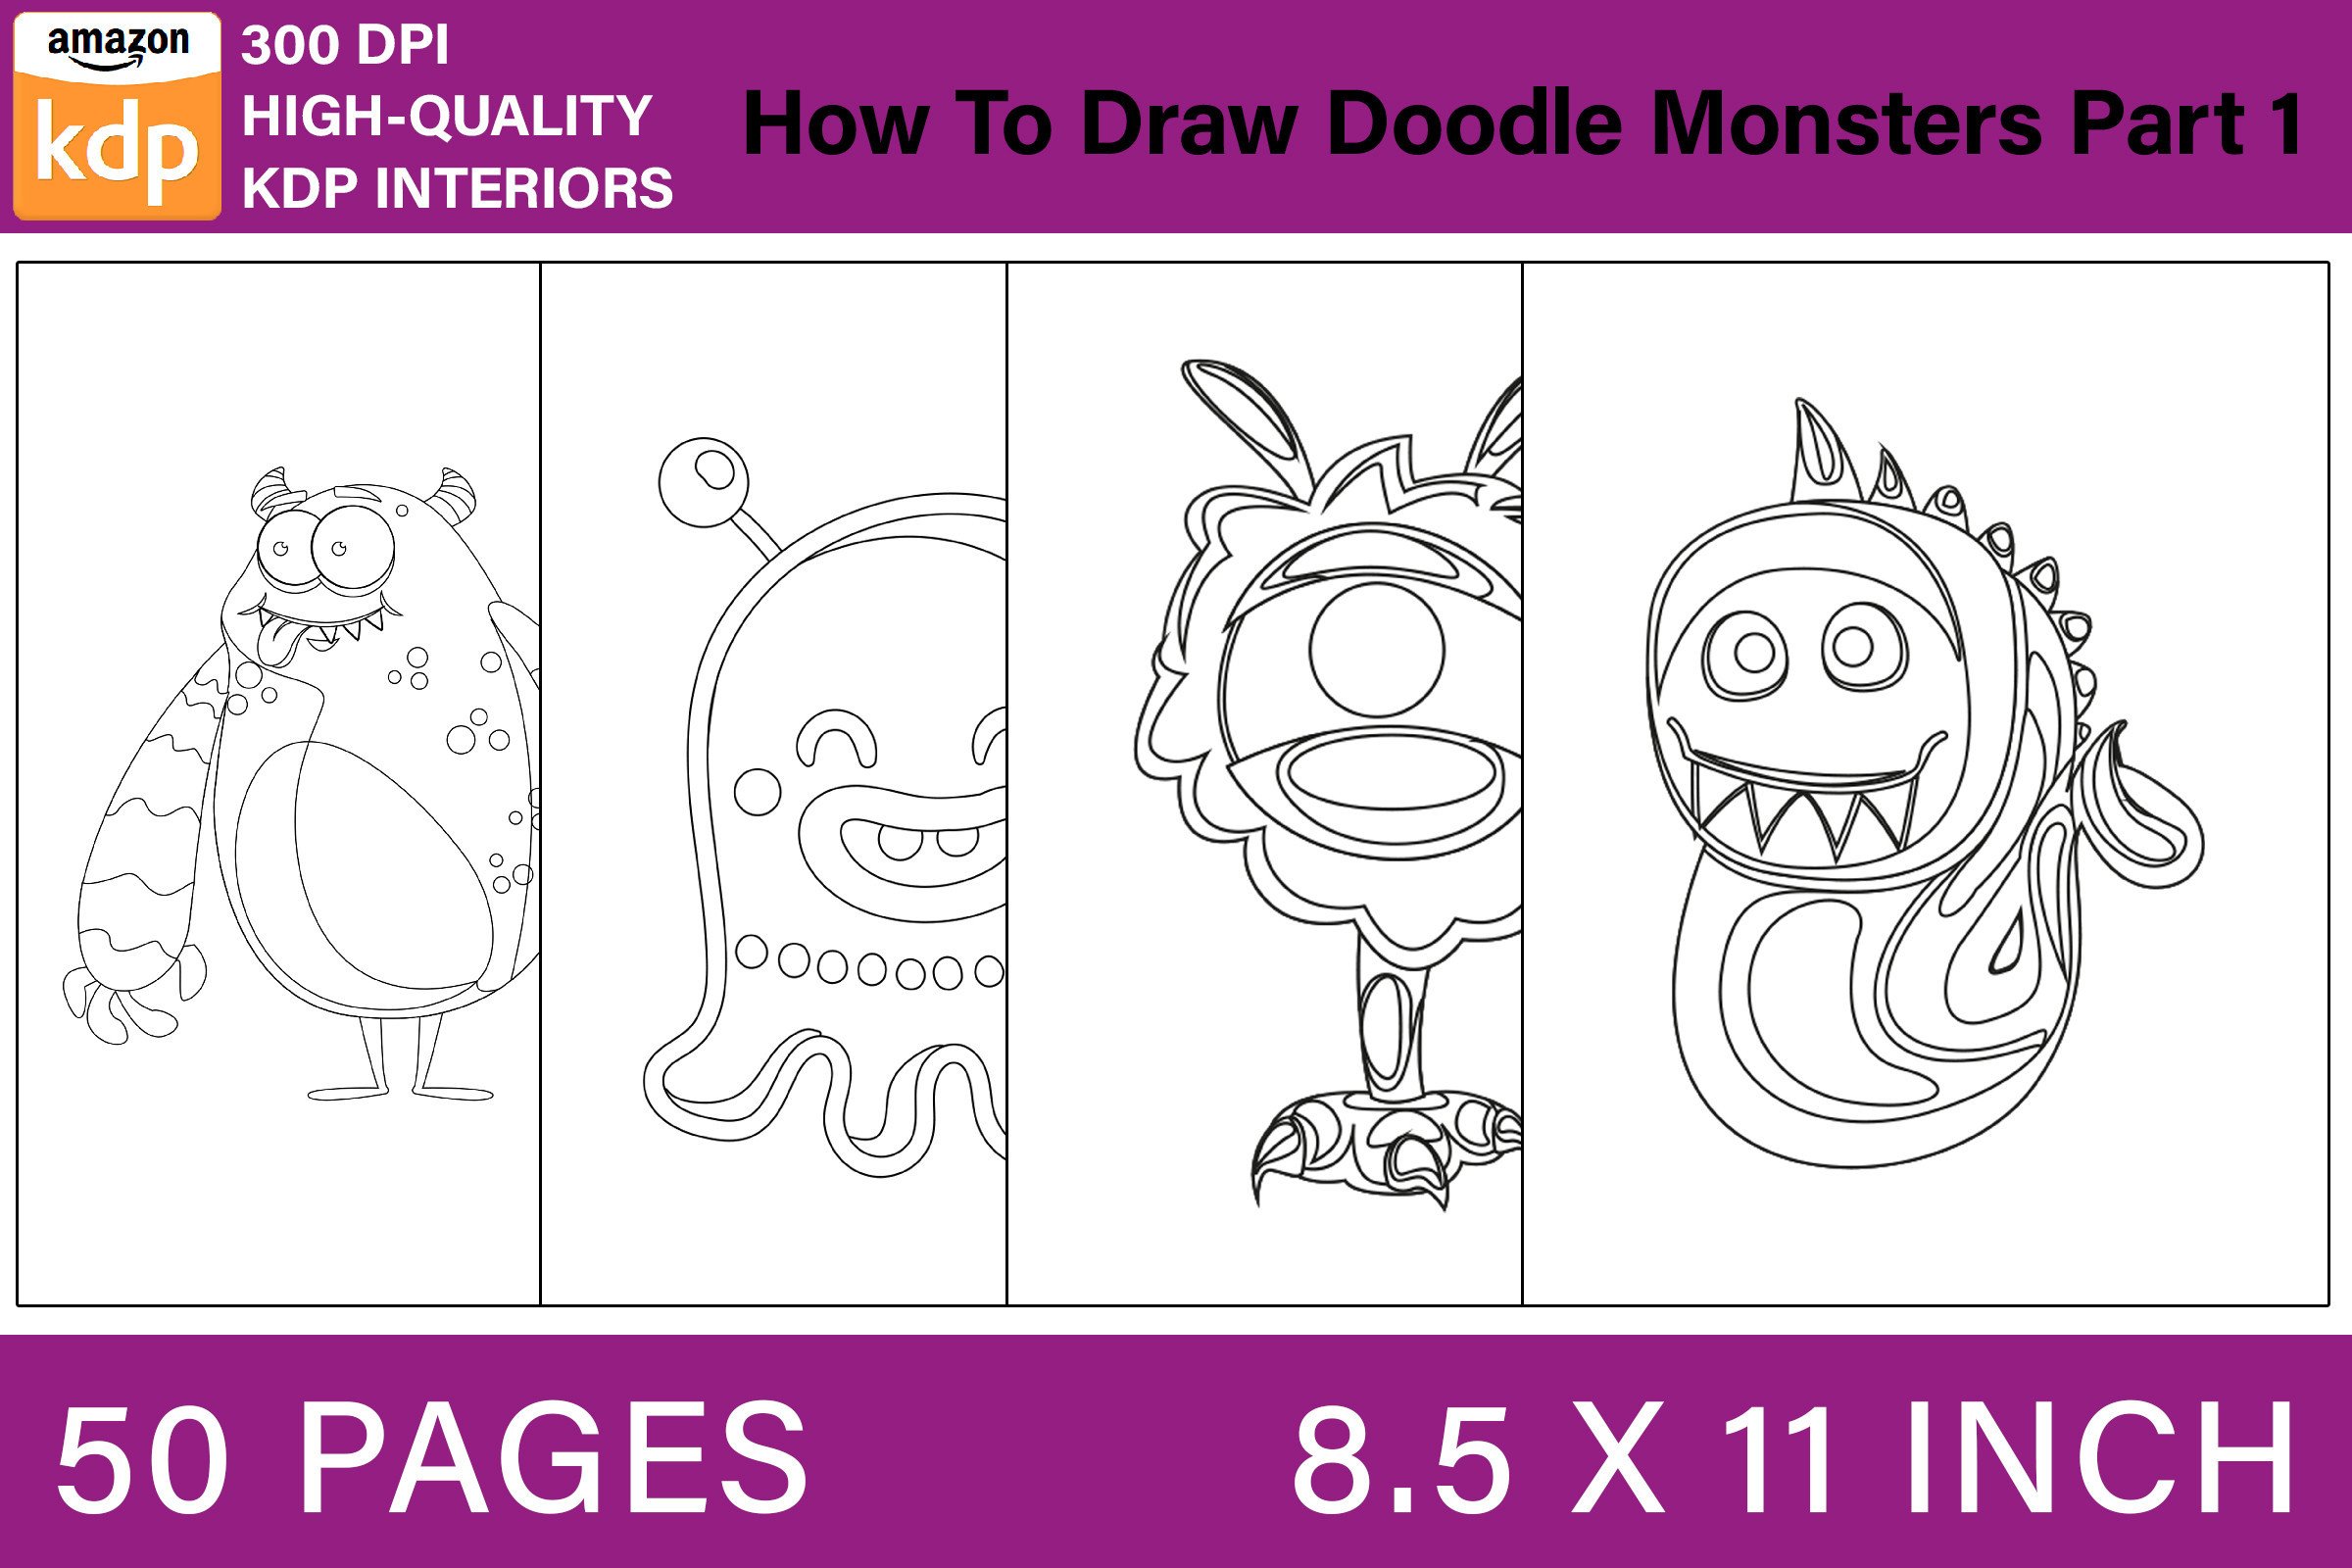 Learn to Draw Cool Stuff Graphic by BreakingDots · Creative Fabrica